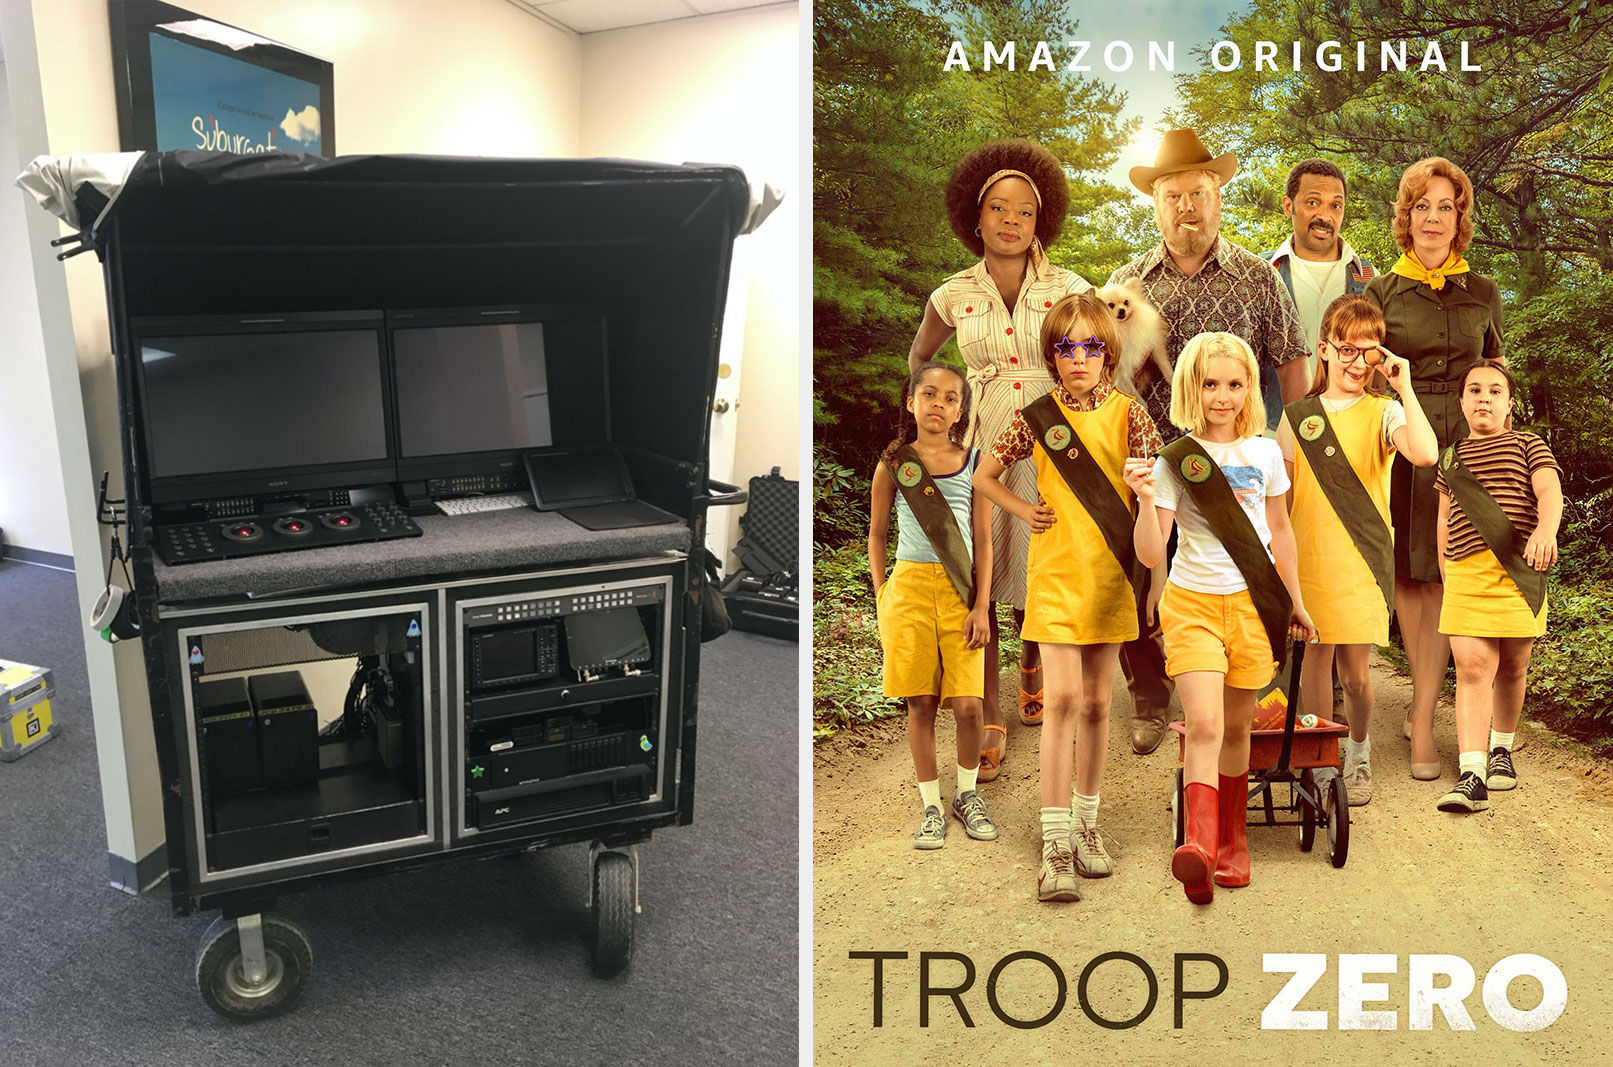 Moving images under the stars in Troop Zero